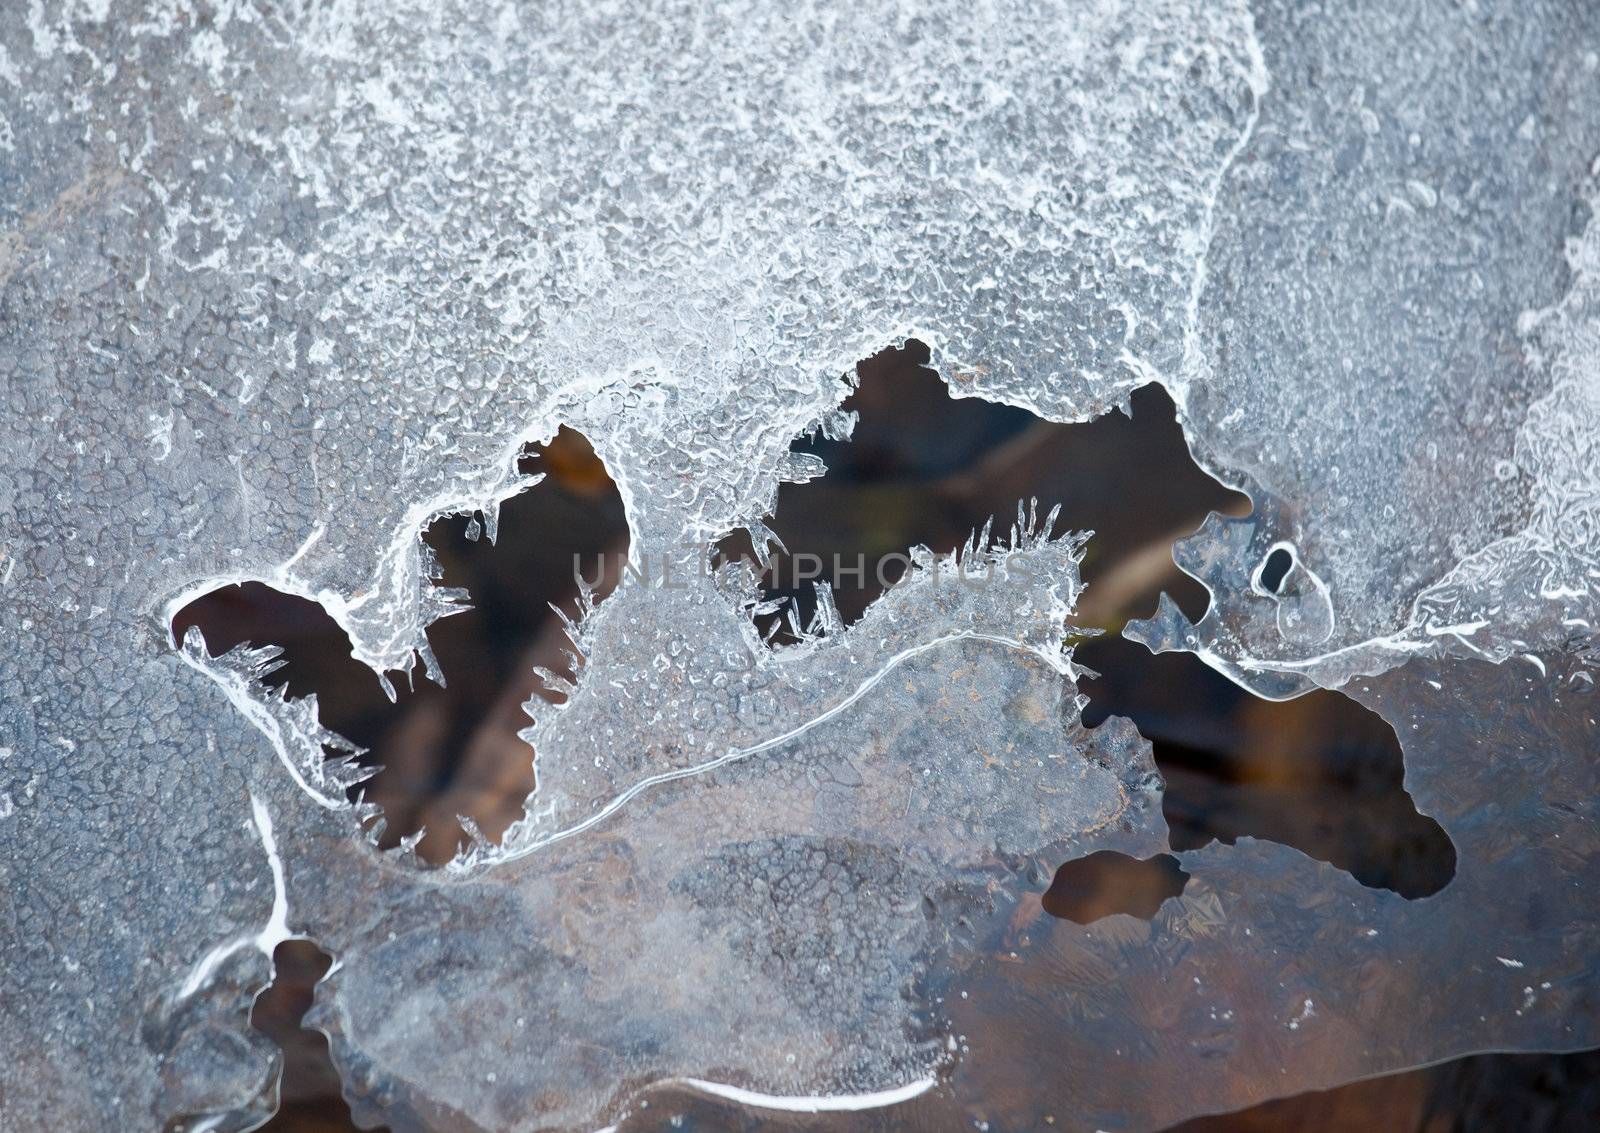 Patterns in the ice above a stream by steheap